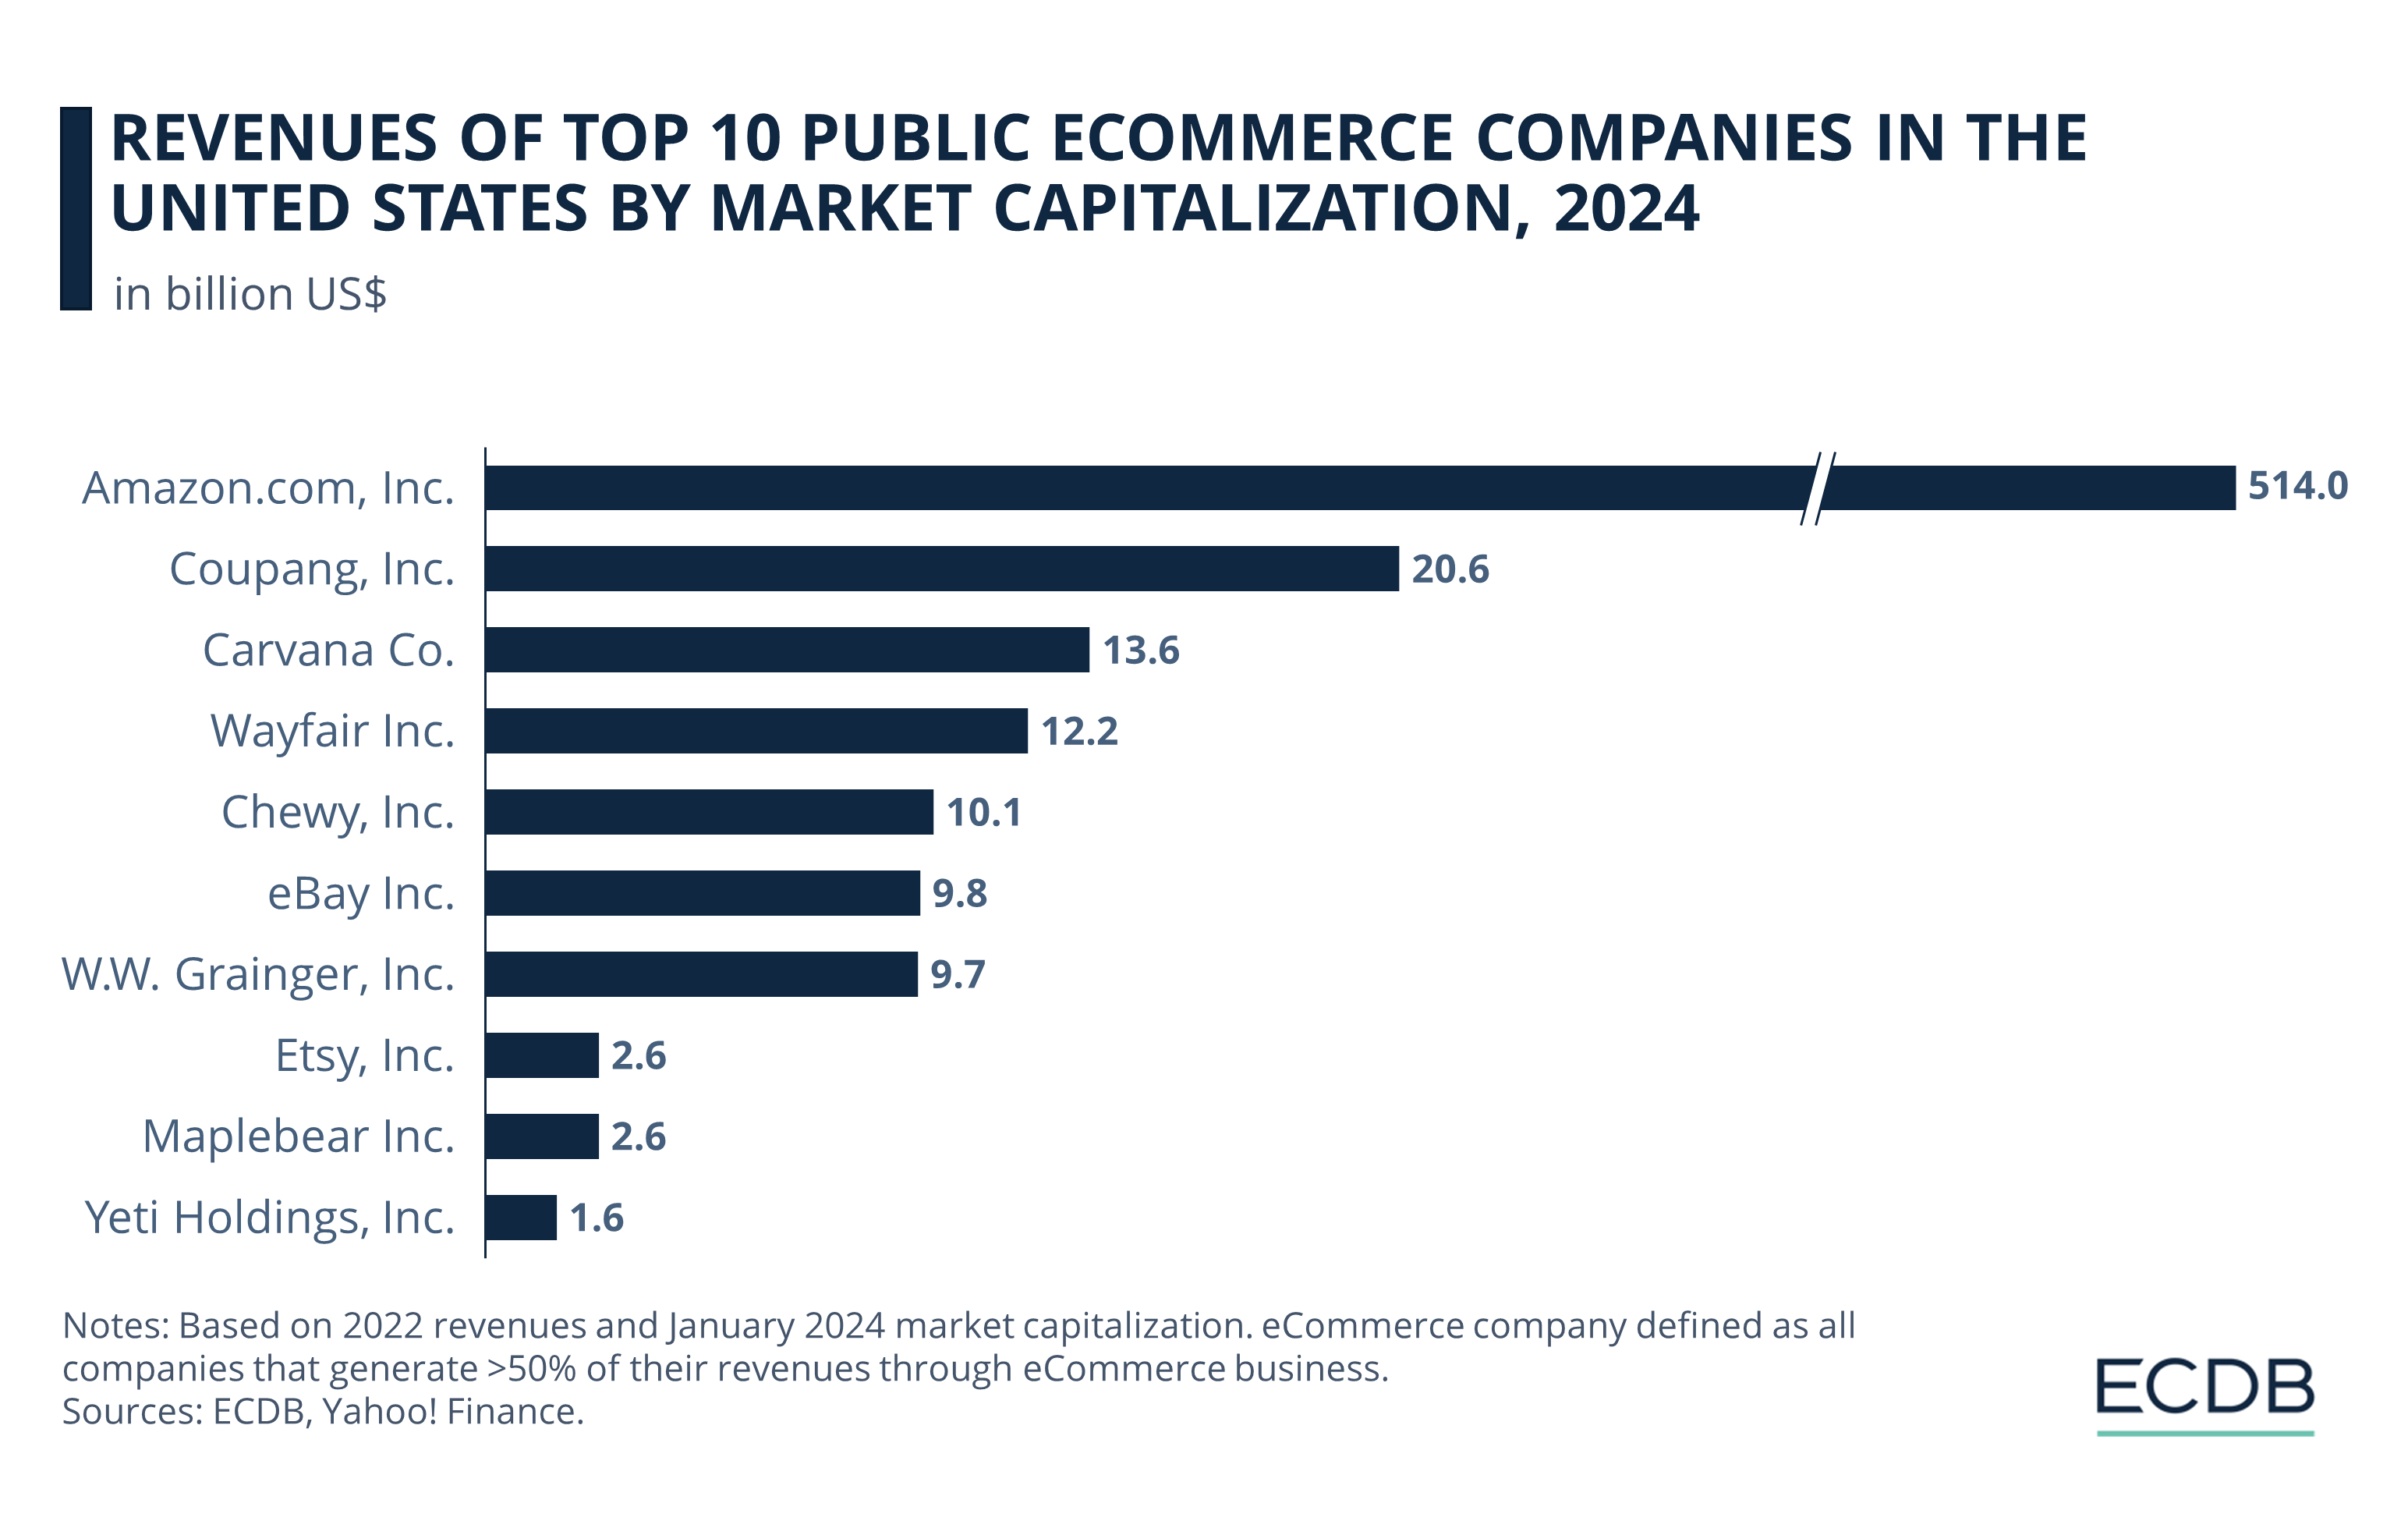 Revenues of Top 10 Public eCommerce Companies in the United States by Market Capitalization, 2024